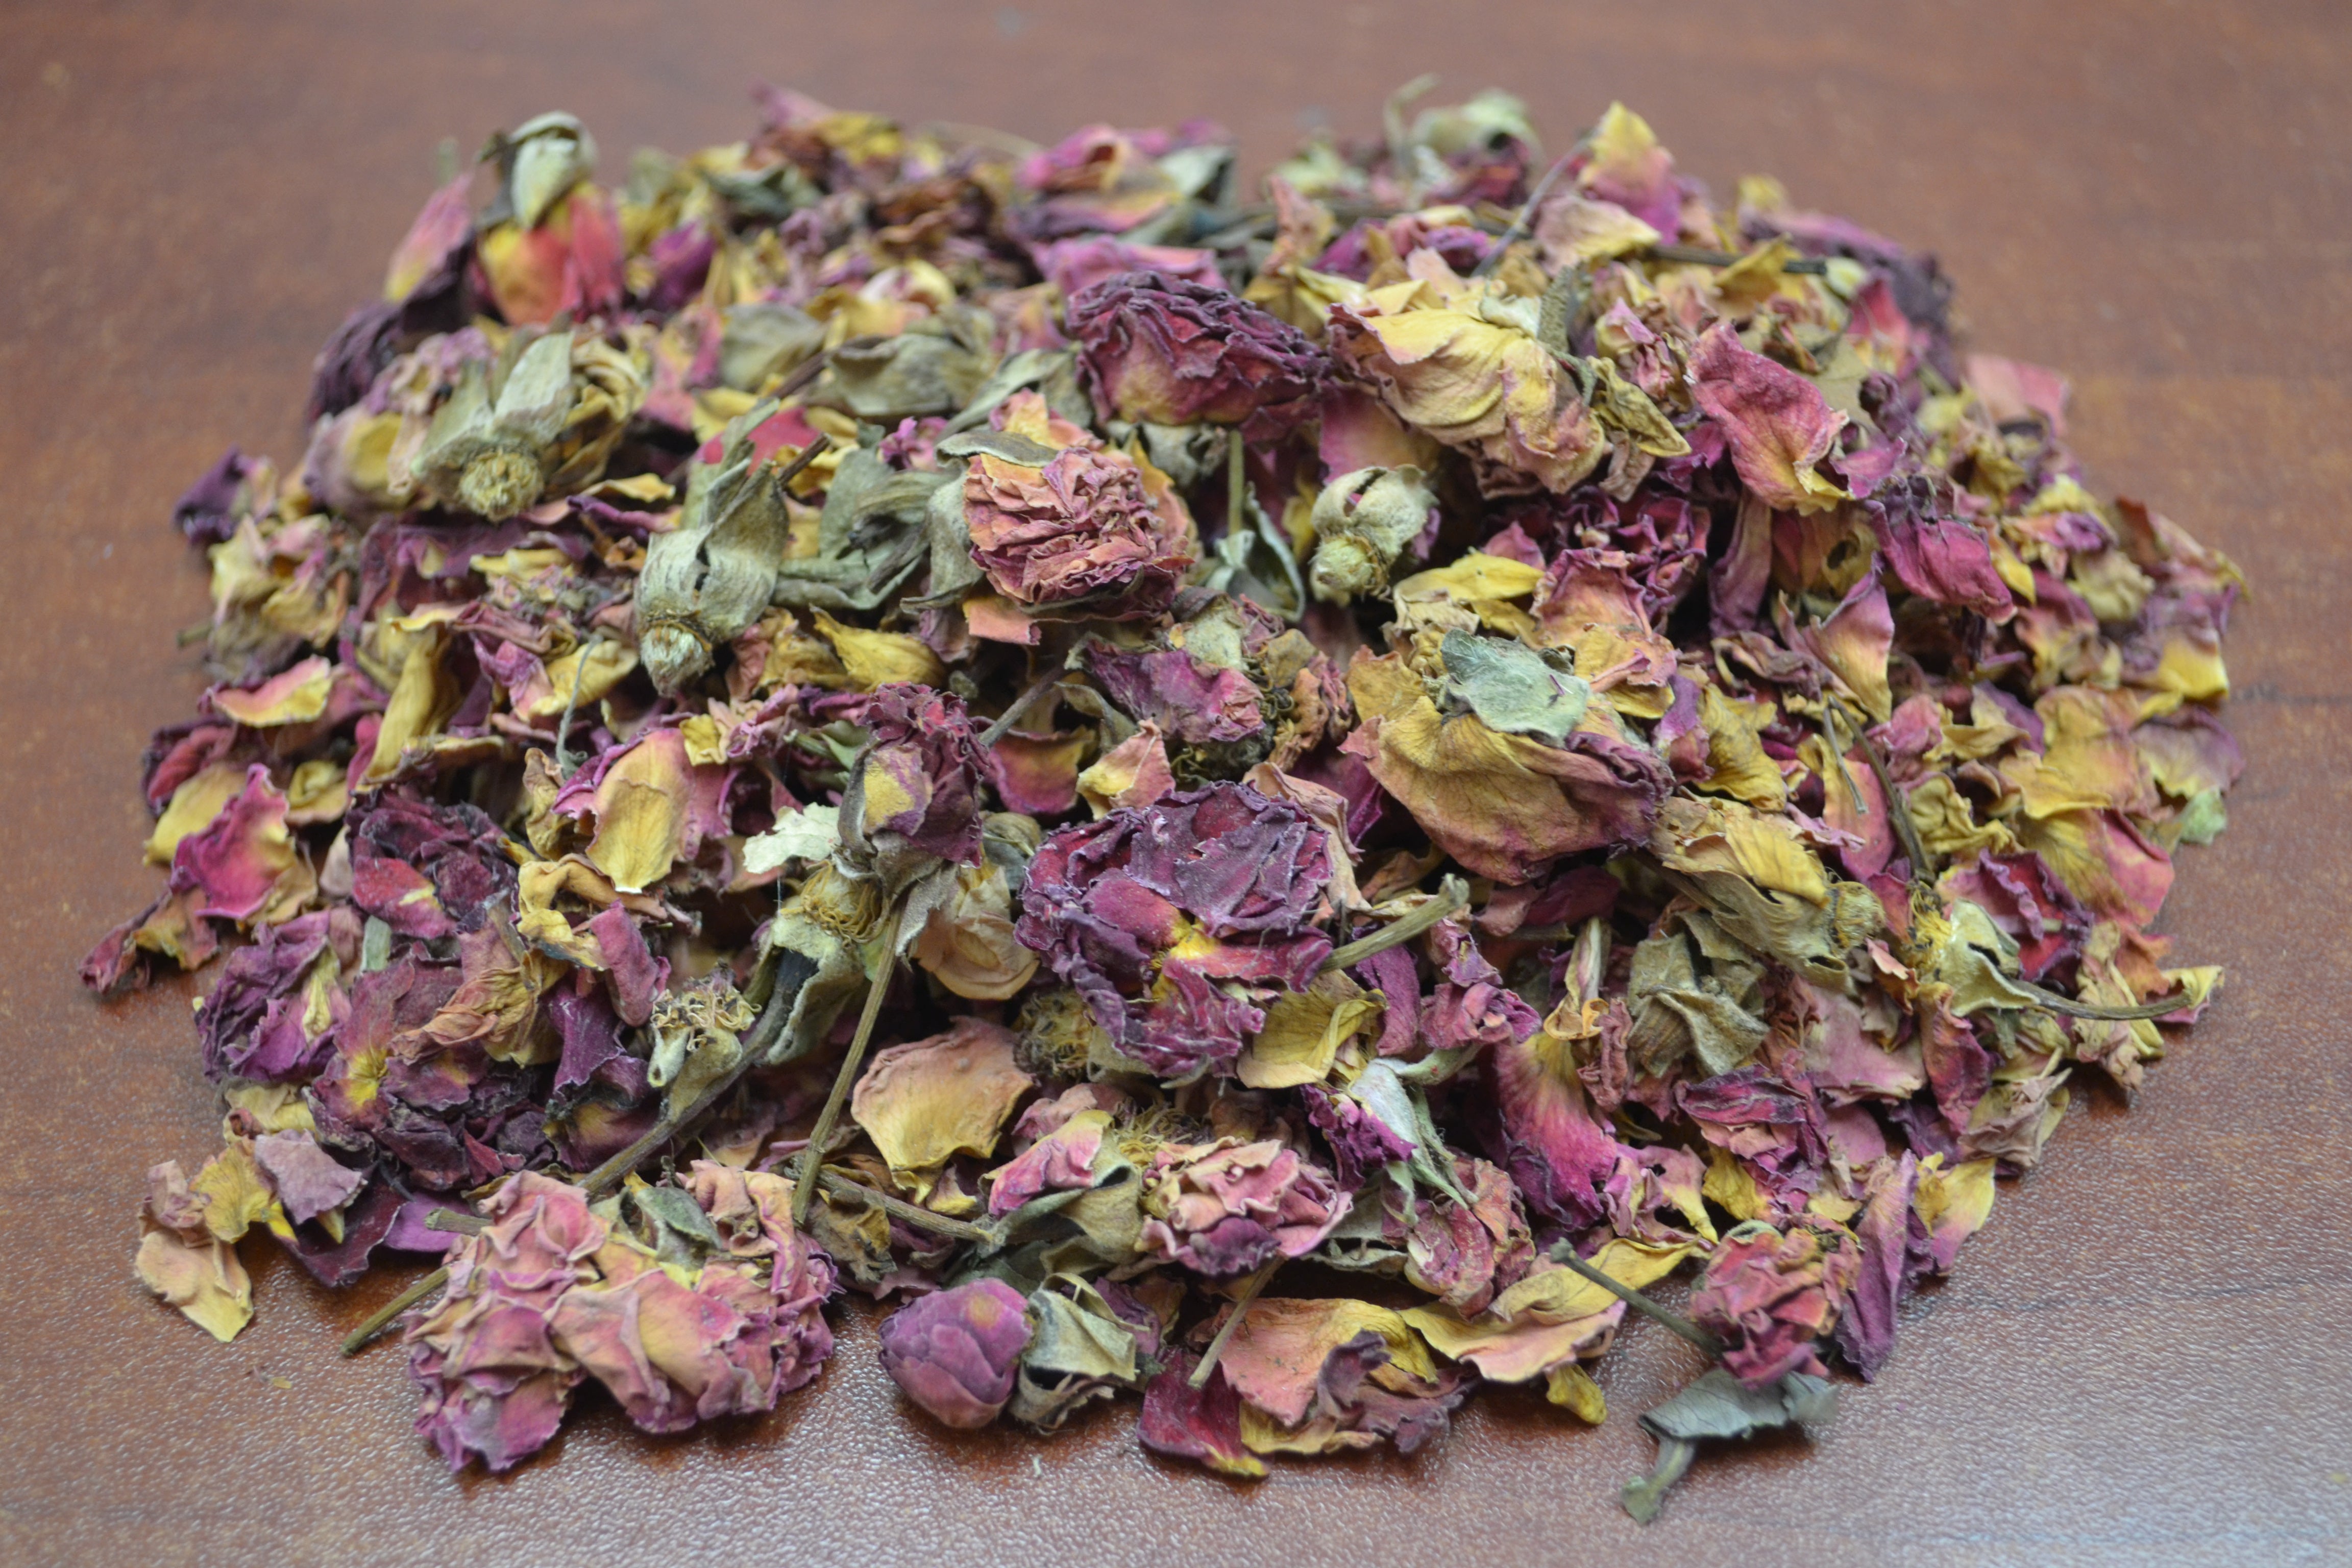 1 Pound DRIED ROSE BUDS PETALS - Loose Incense